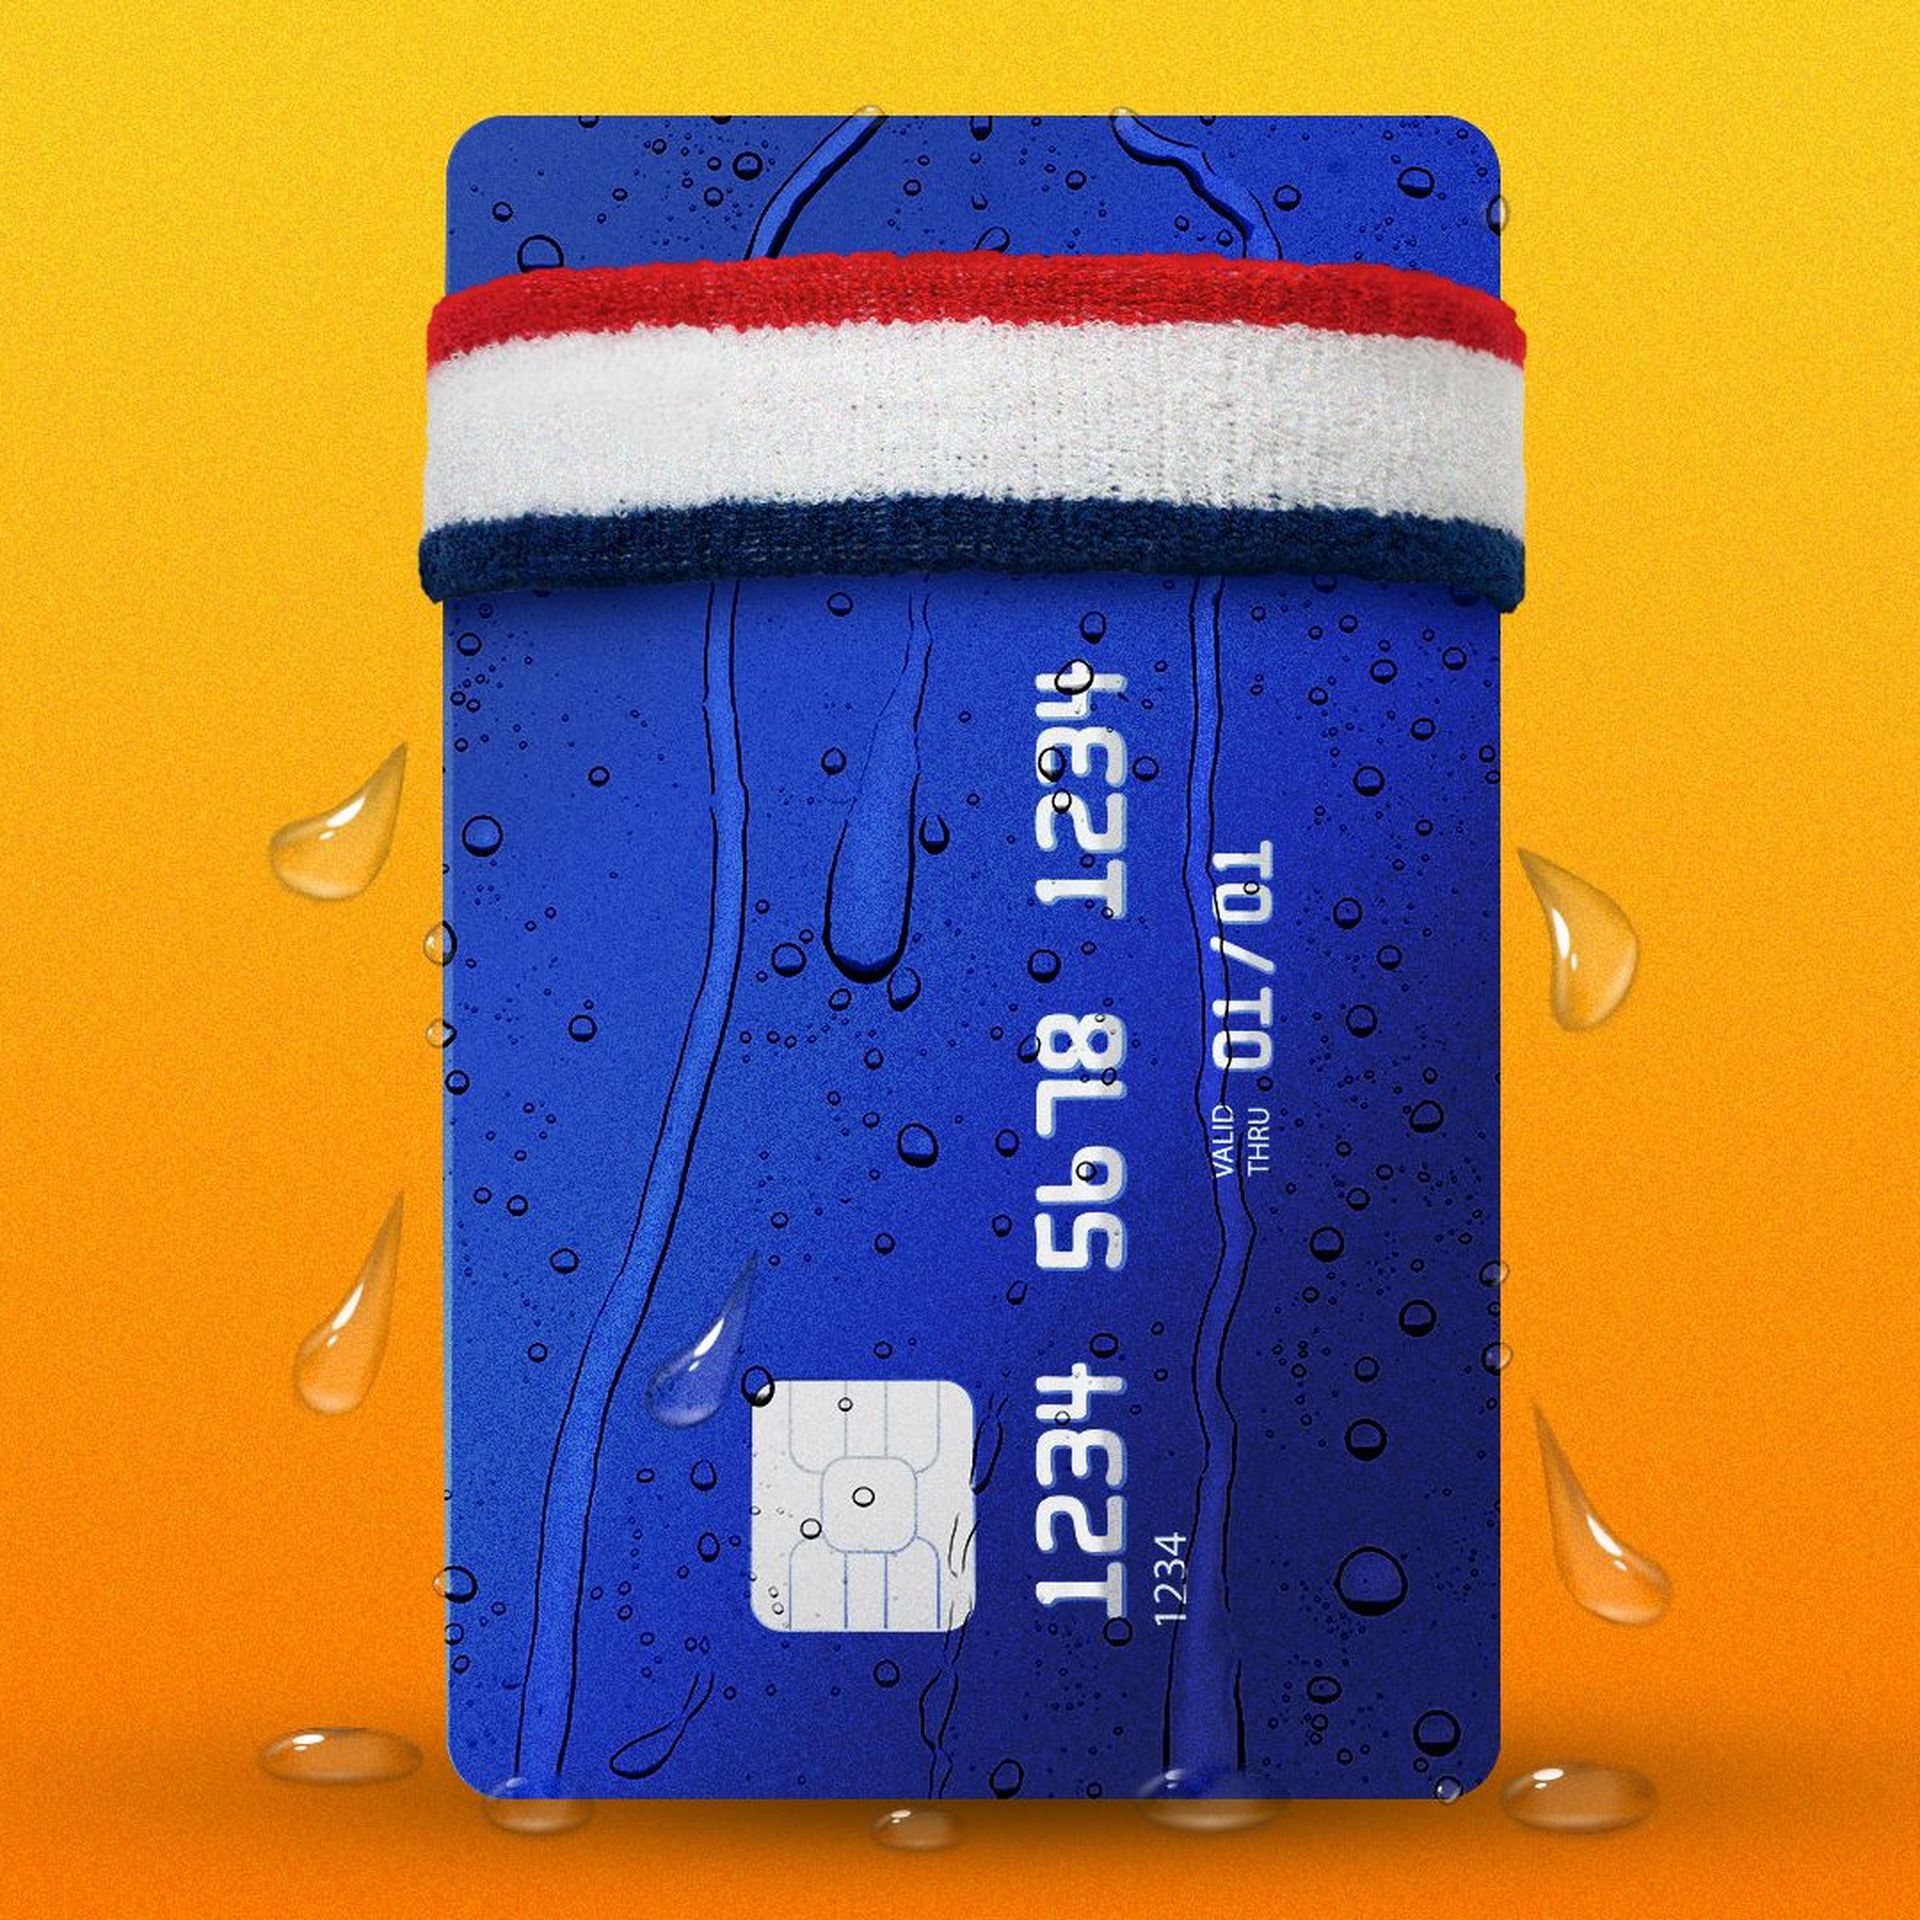 Illustration of a credit card wearing a sweatband and dripping sweat.